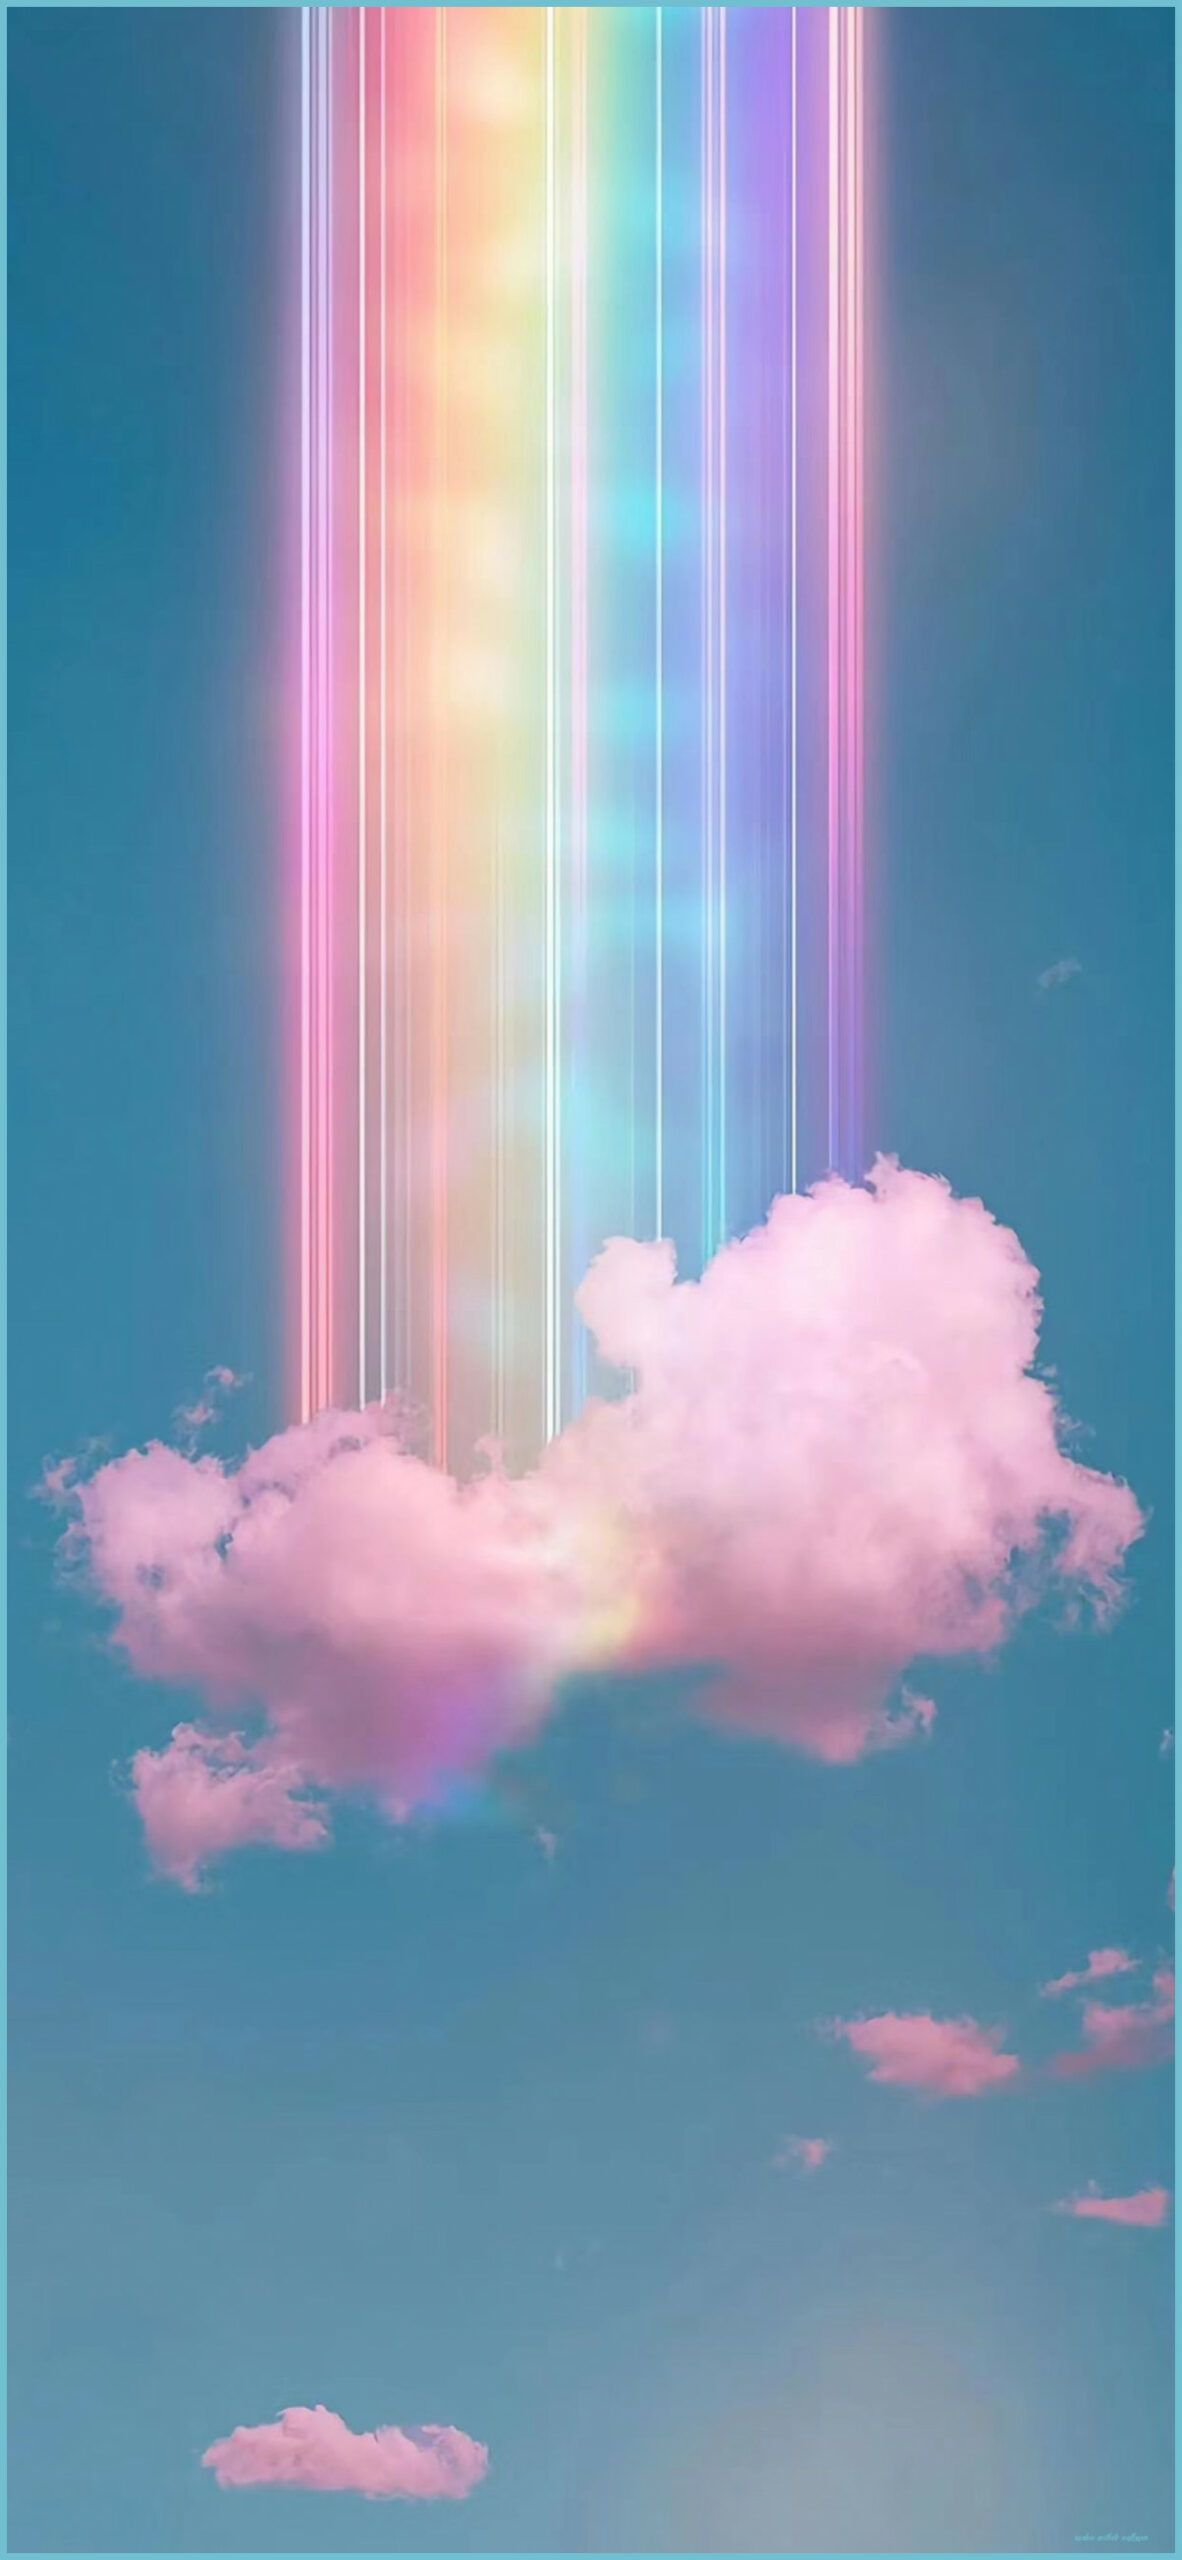 Why Is Everyone Talking About Rainbow Aesthetic Wallpaper?. Rainbow Aesthetic Wallpaper